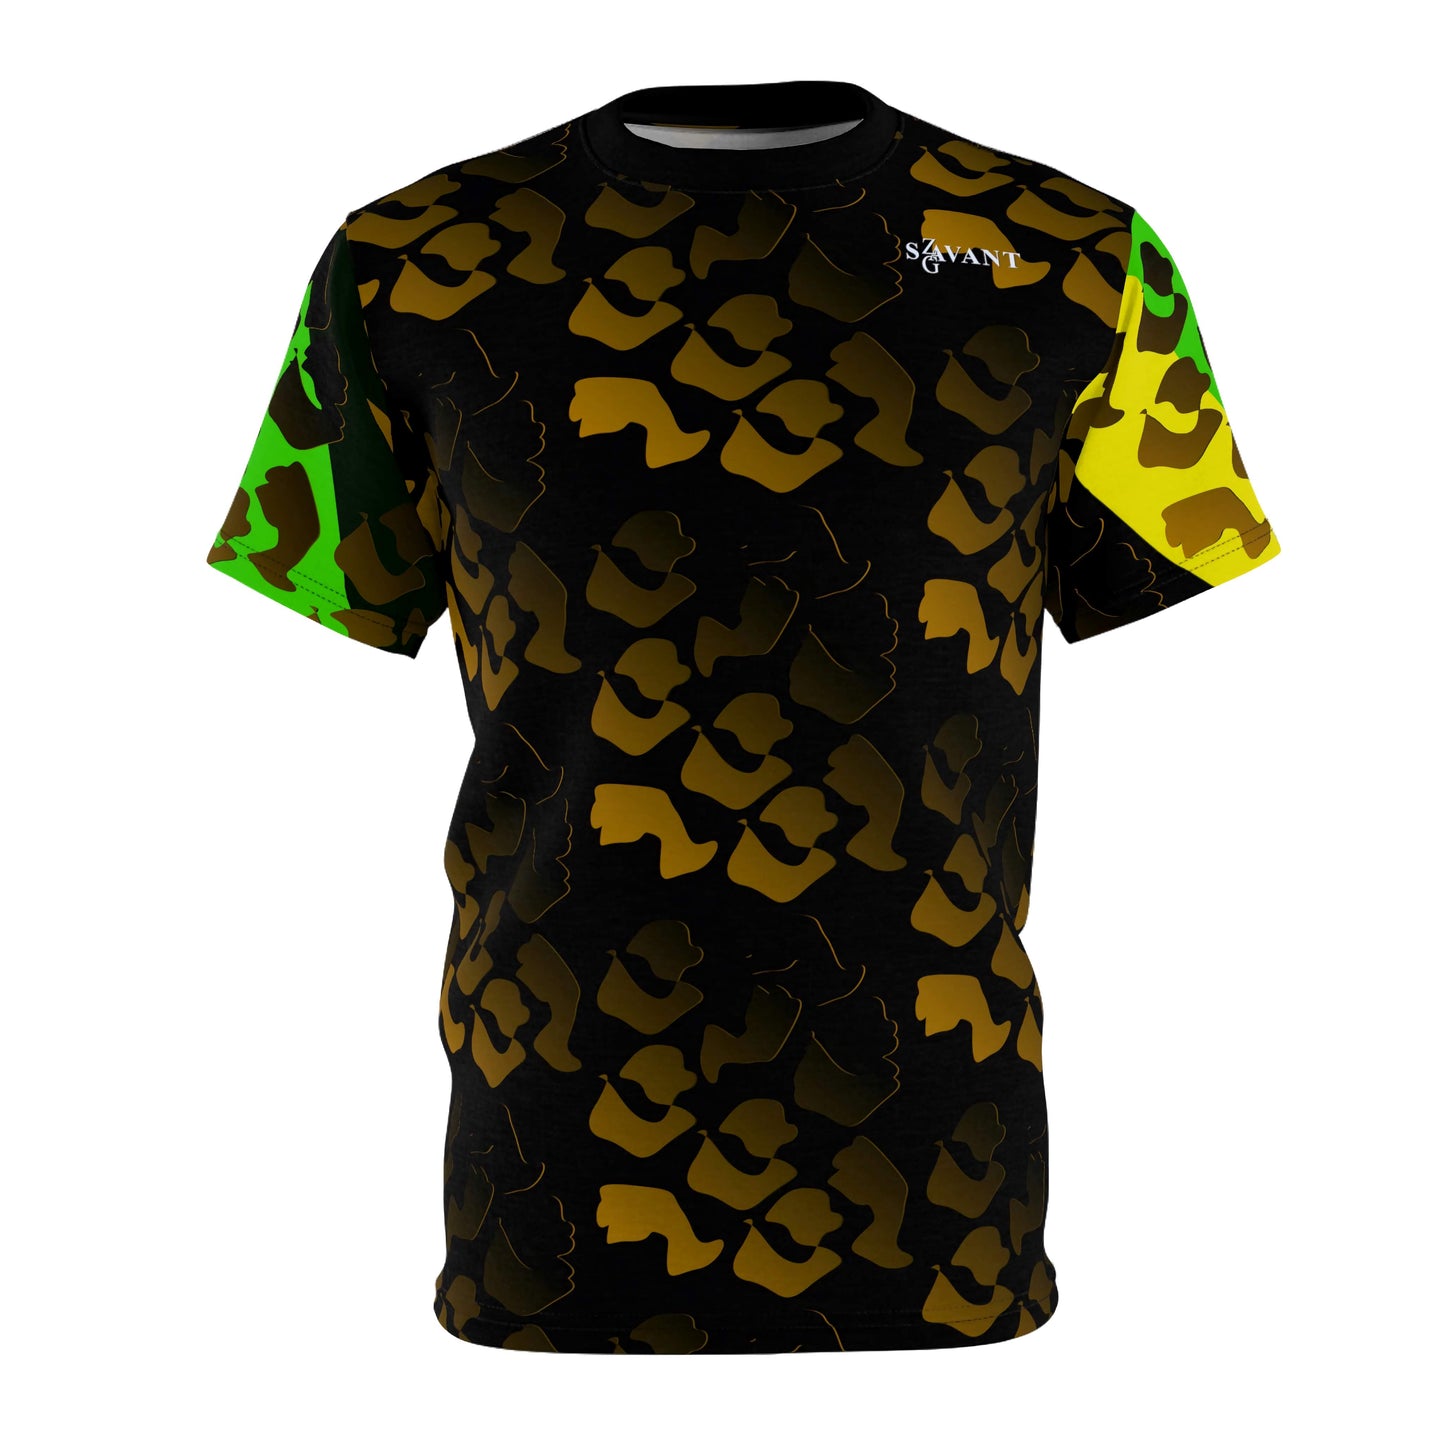 Jamaican style camouflage T-shirt